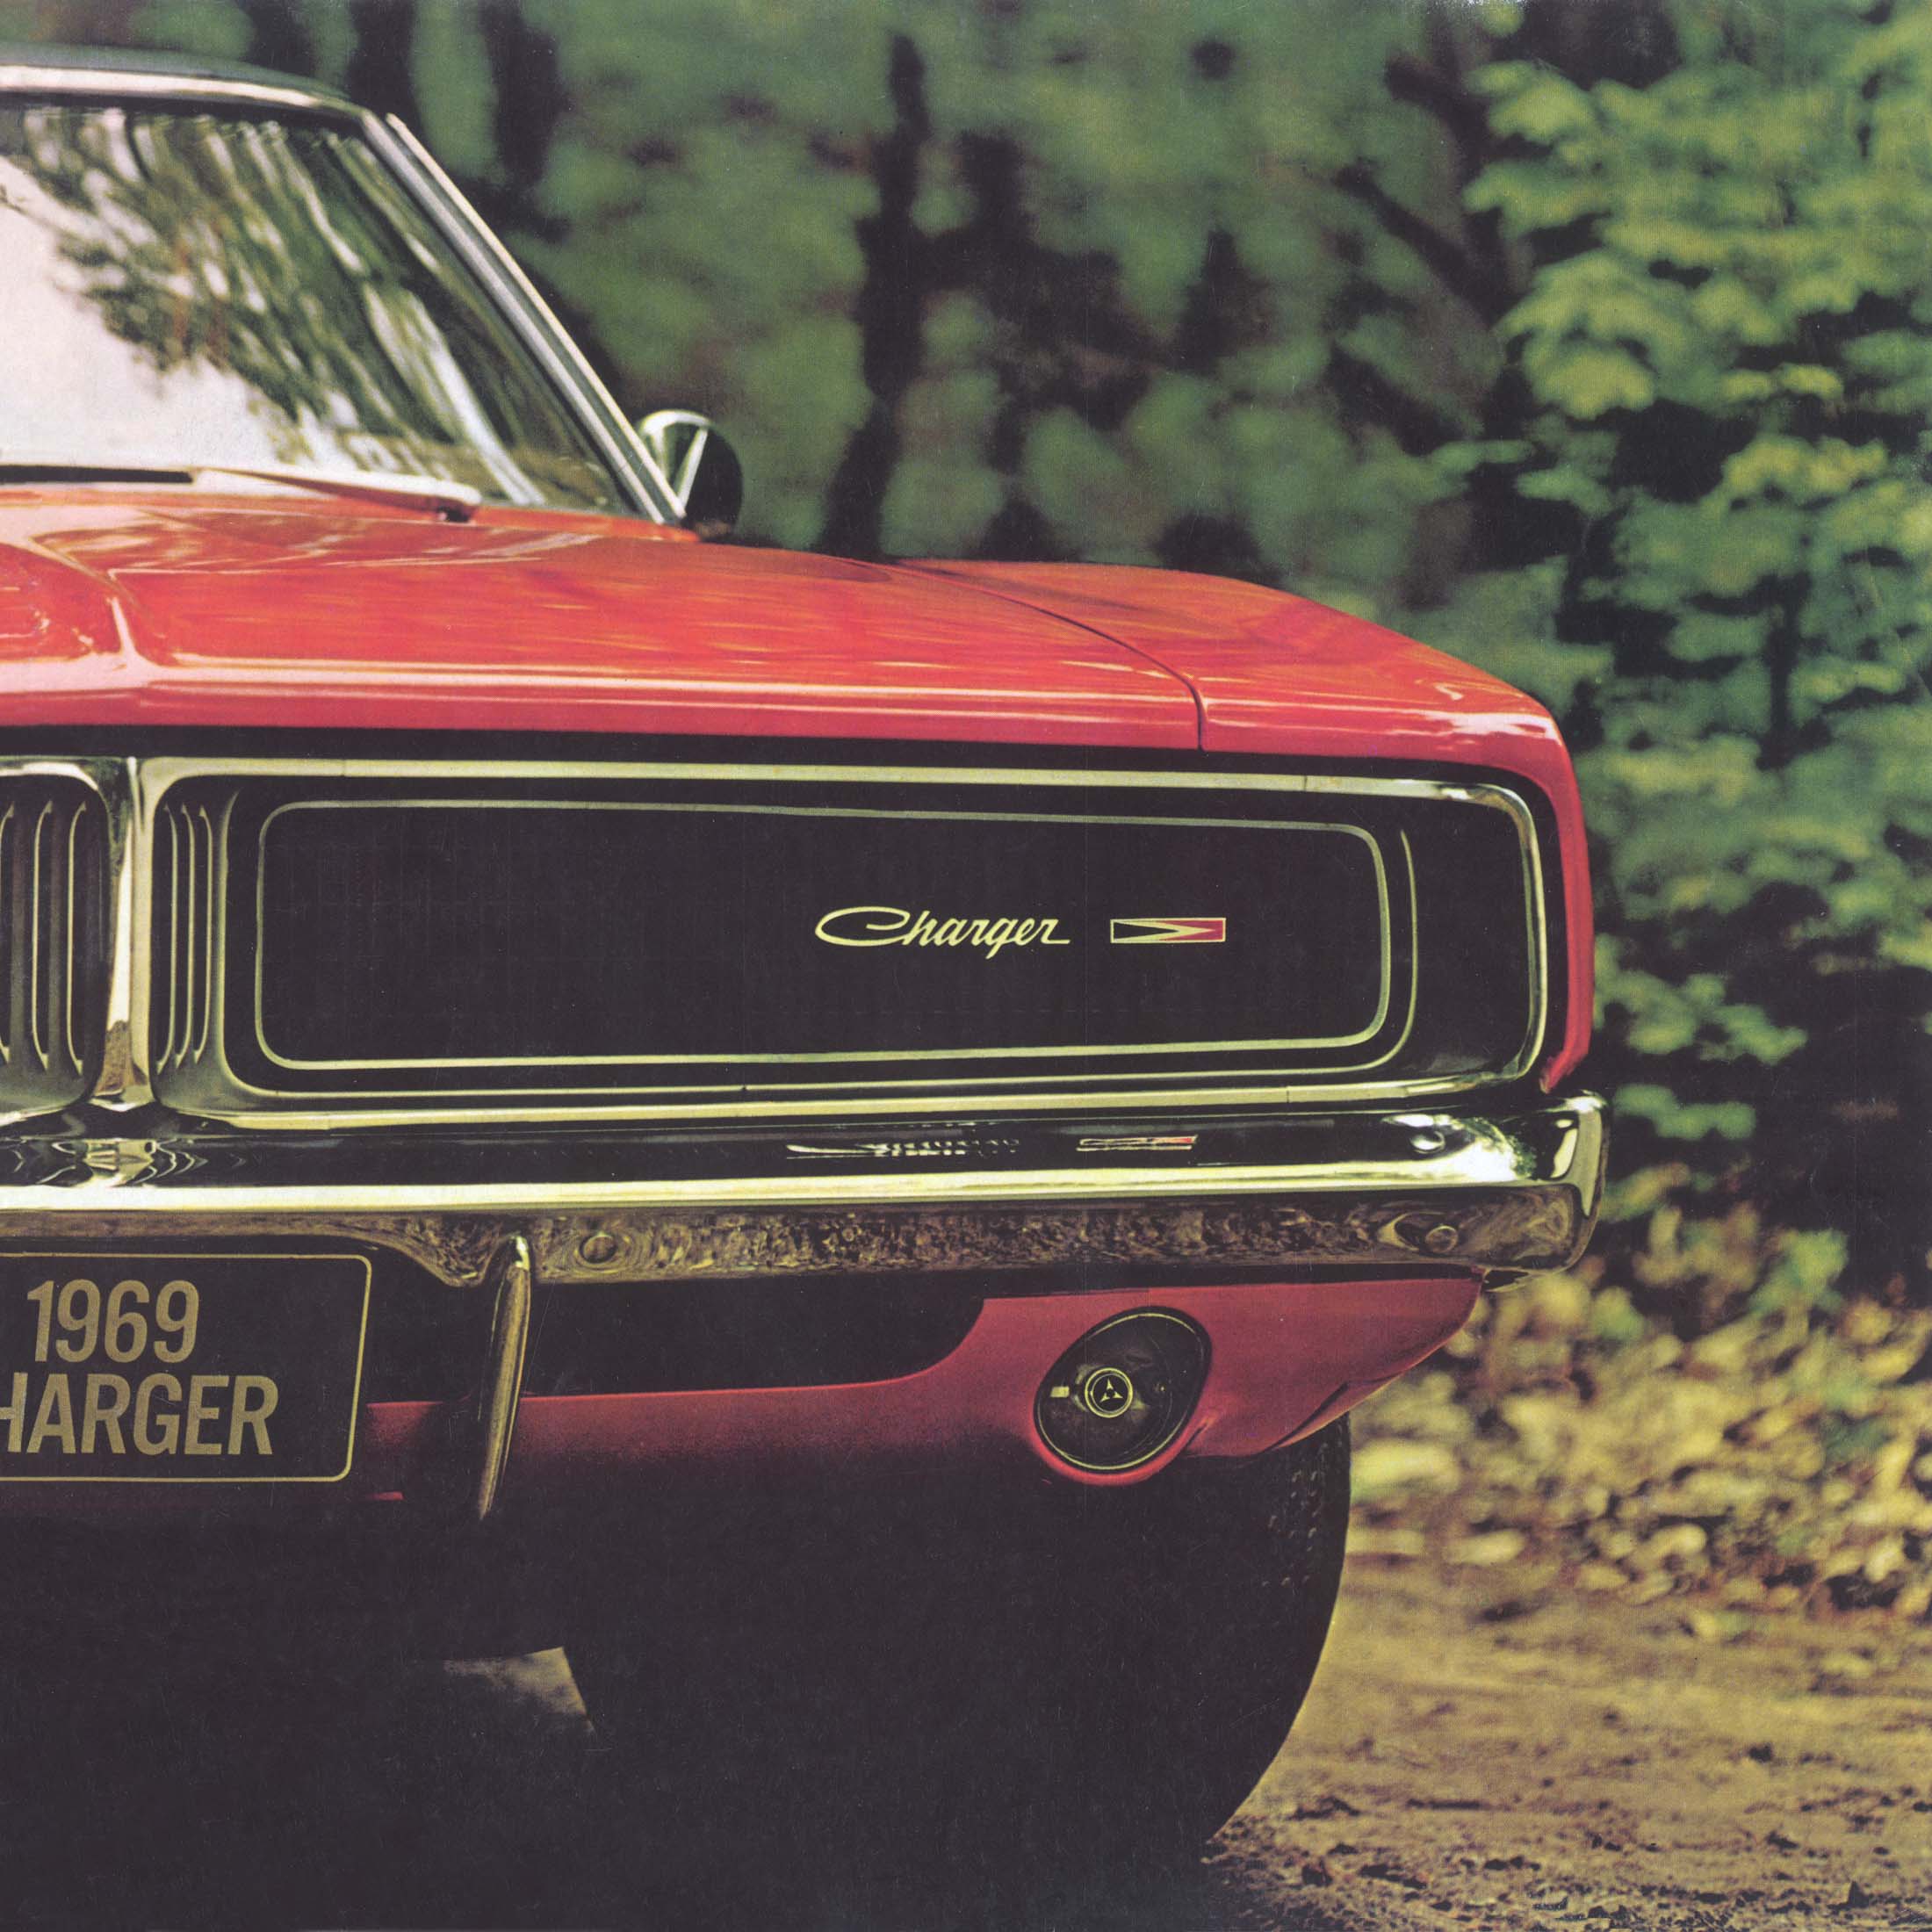 Dodge Charger Wallpaper